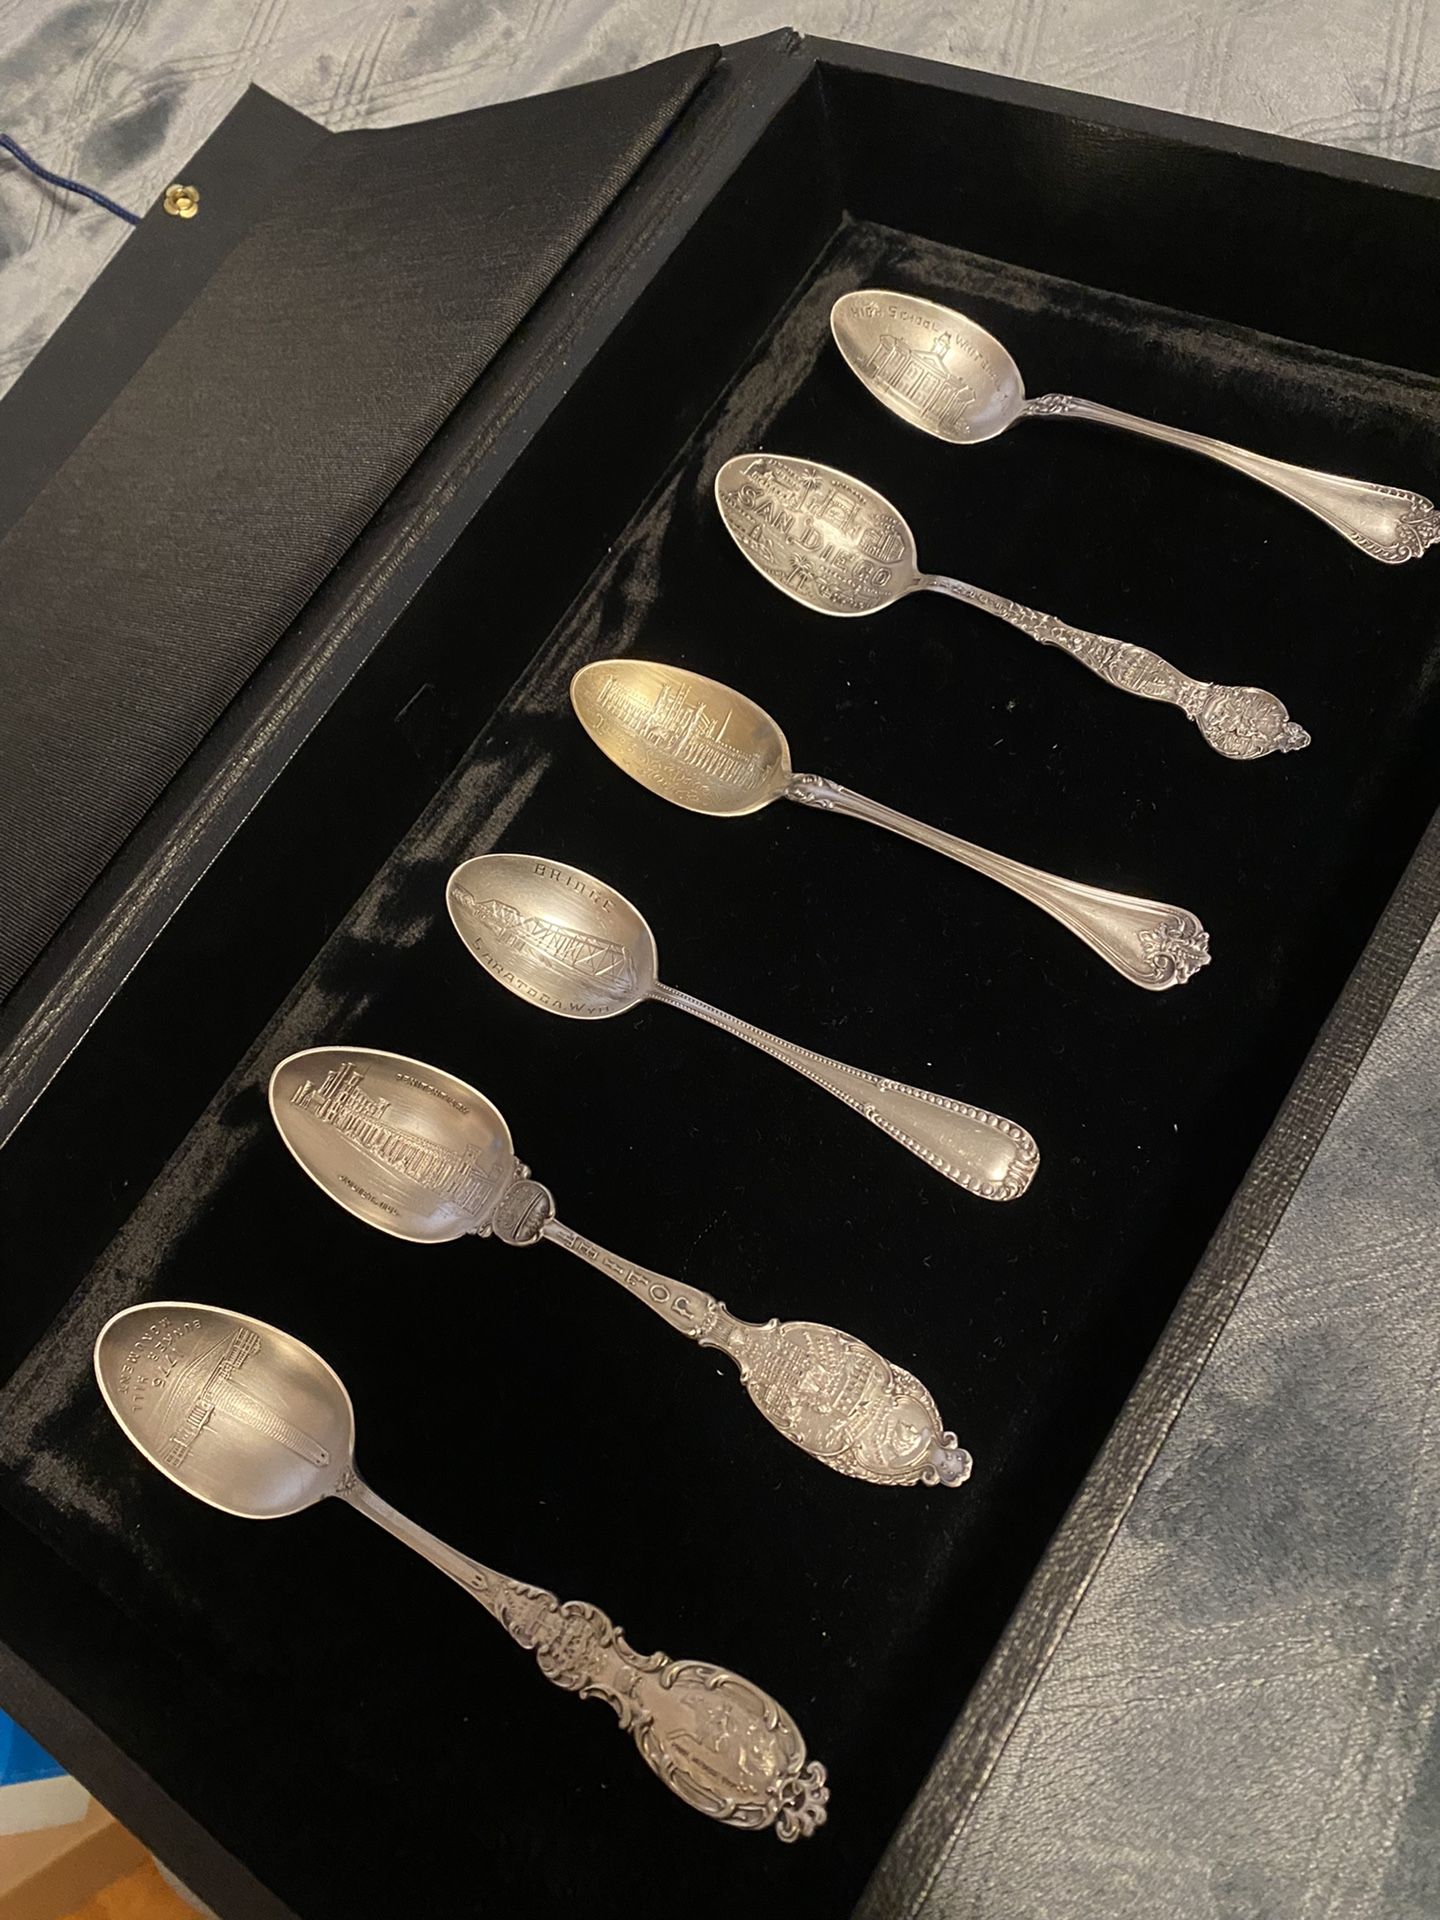 ANTIQUE COLLECTIBLES STERLING SILVER SPOONS 